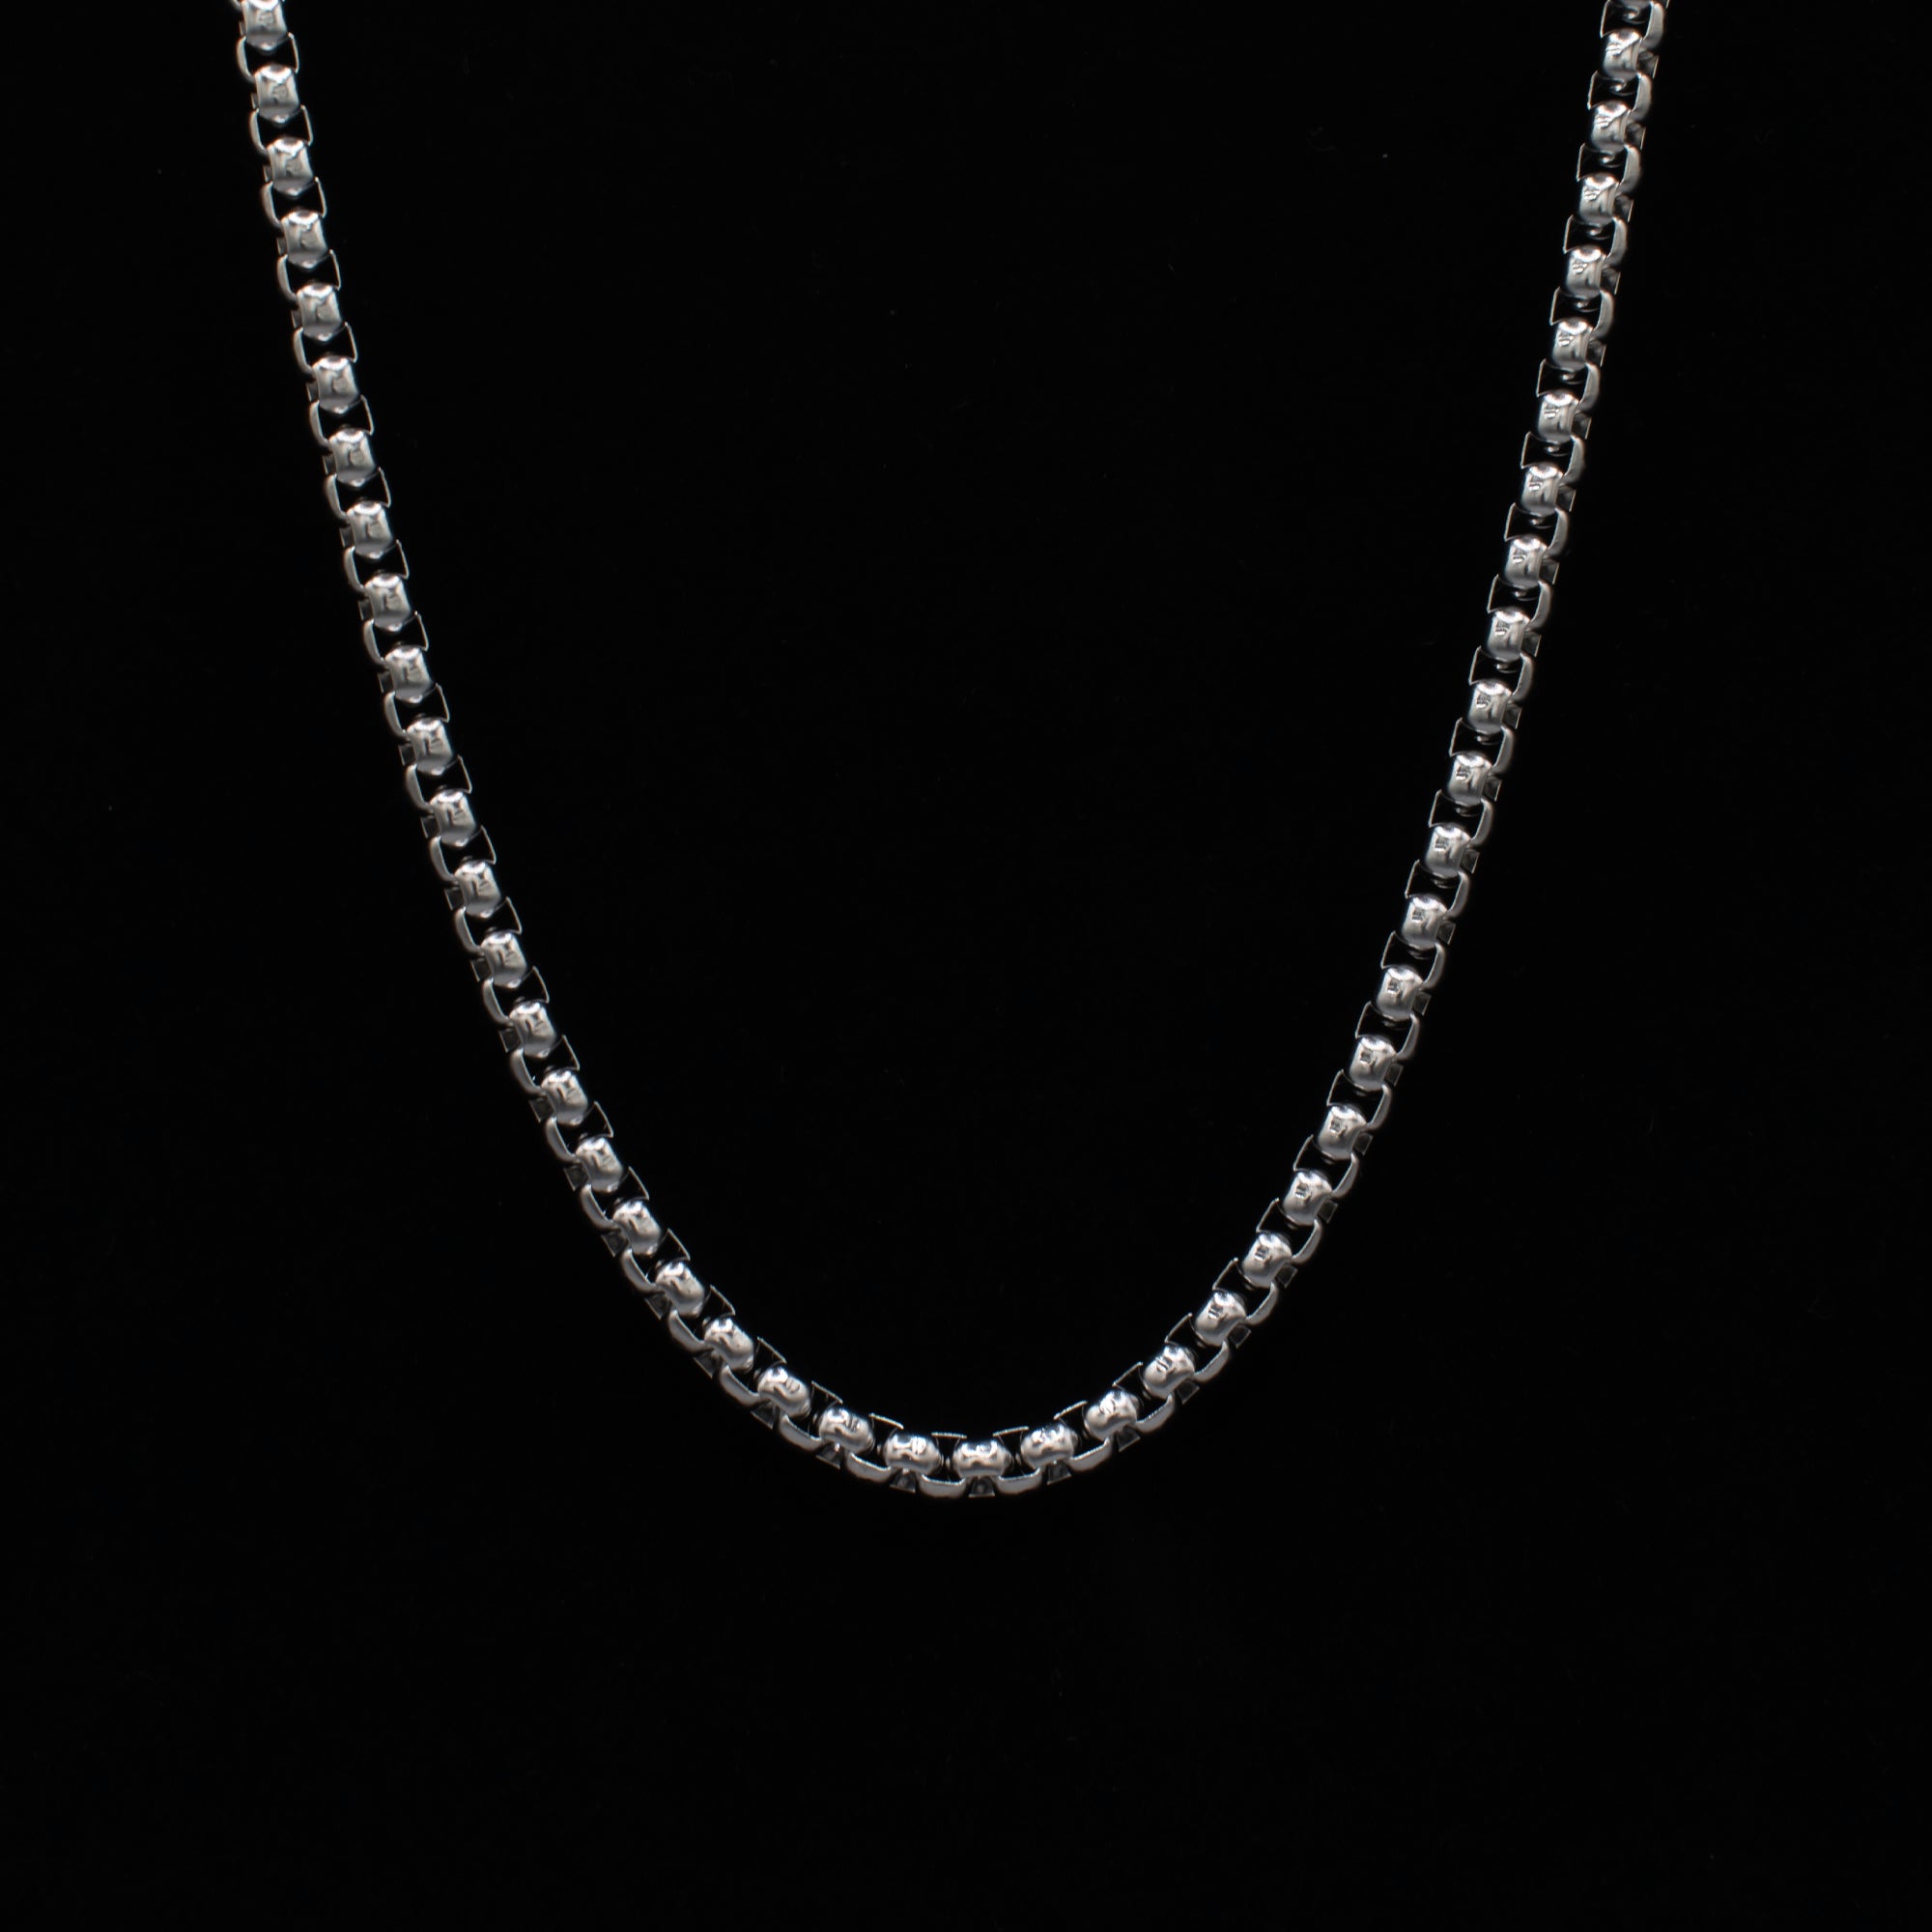 Round Box Chain Necklace - (Silver) 6mm